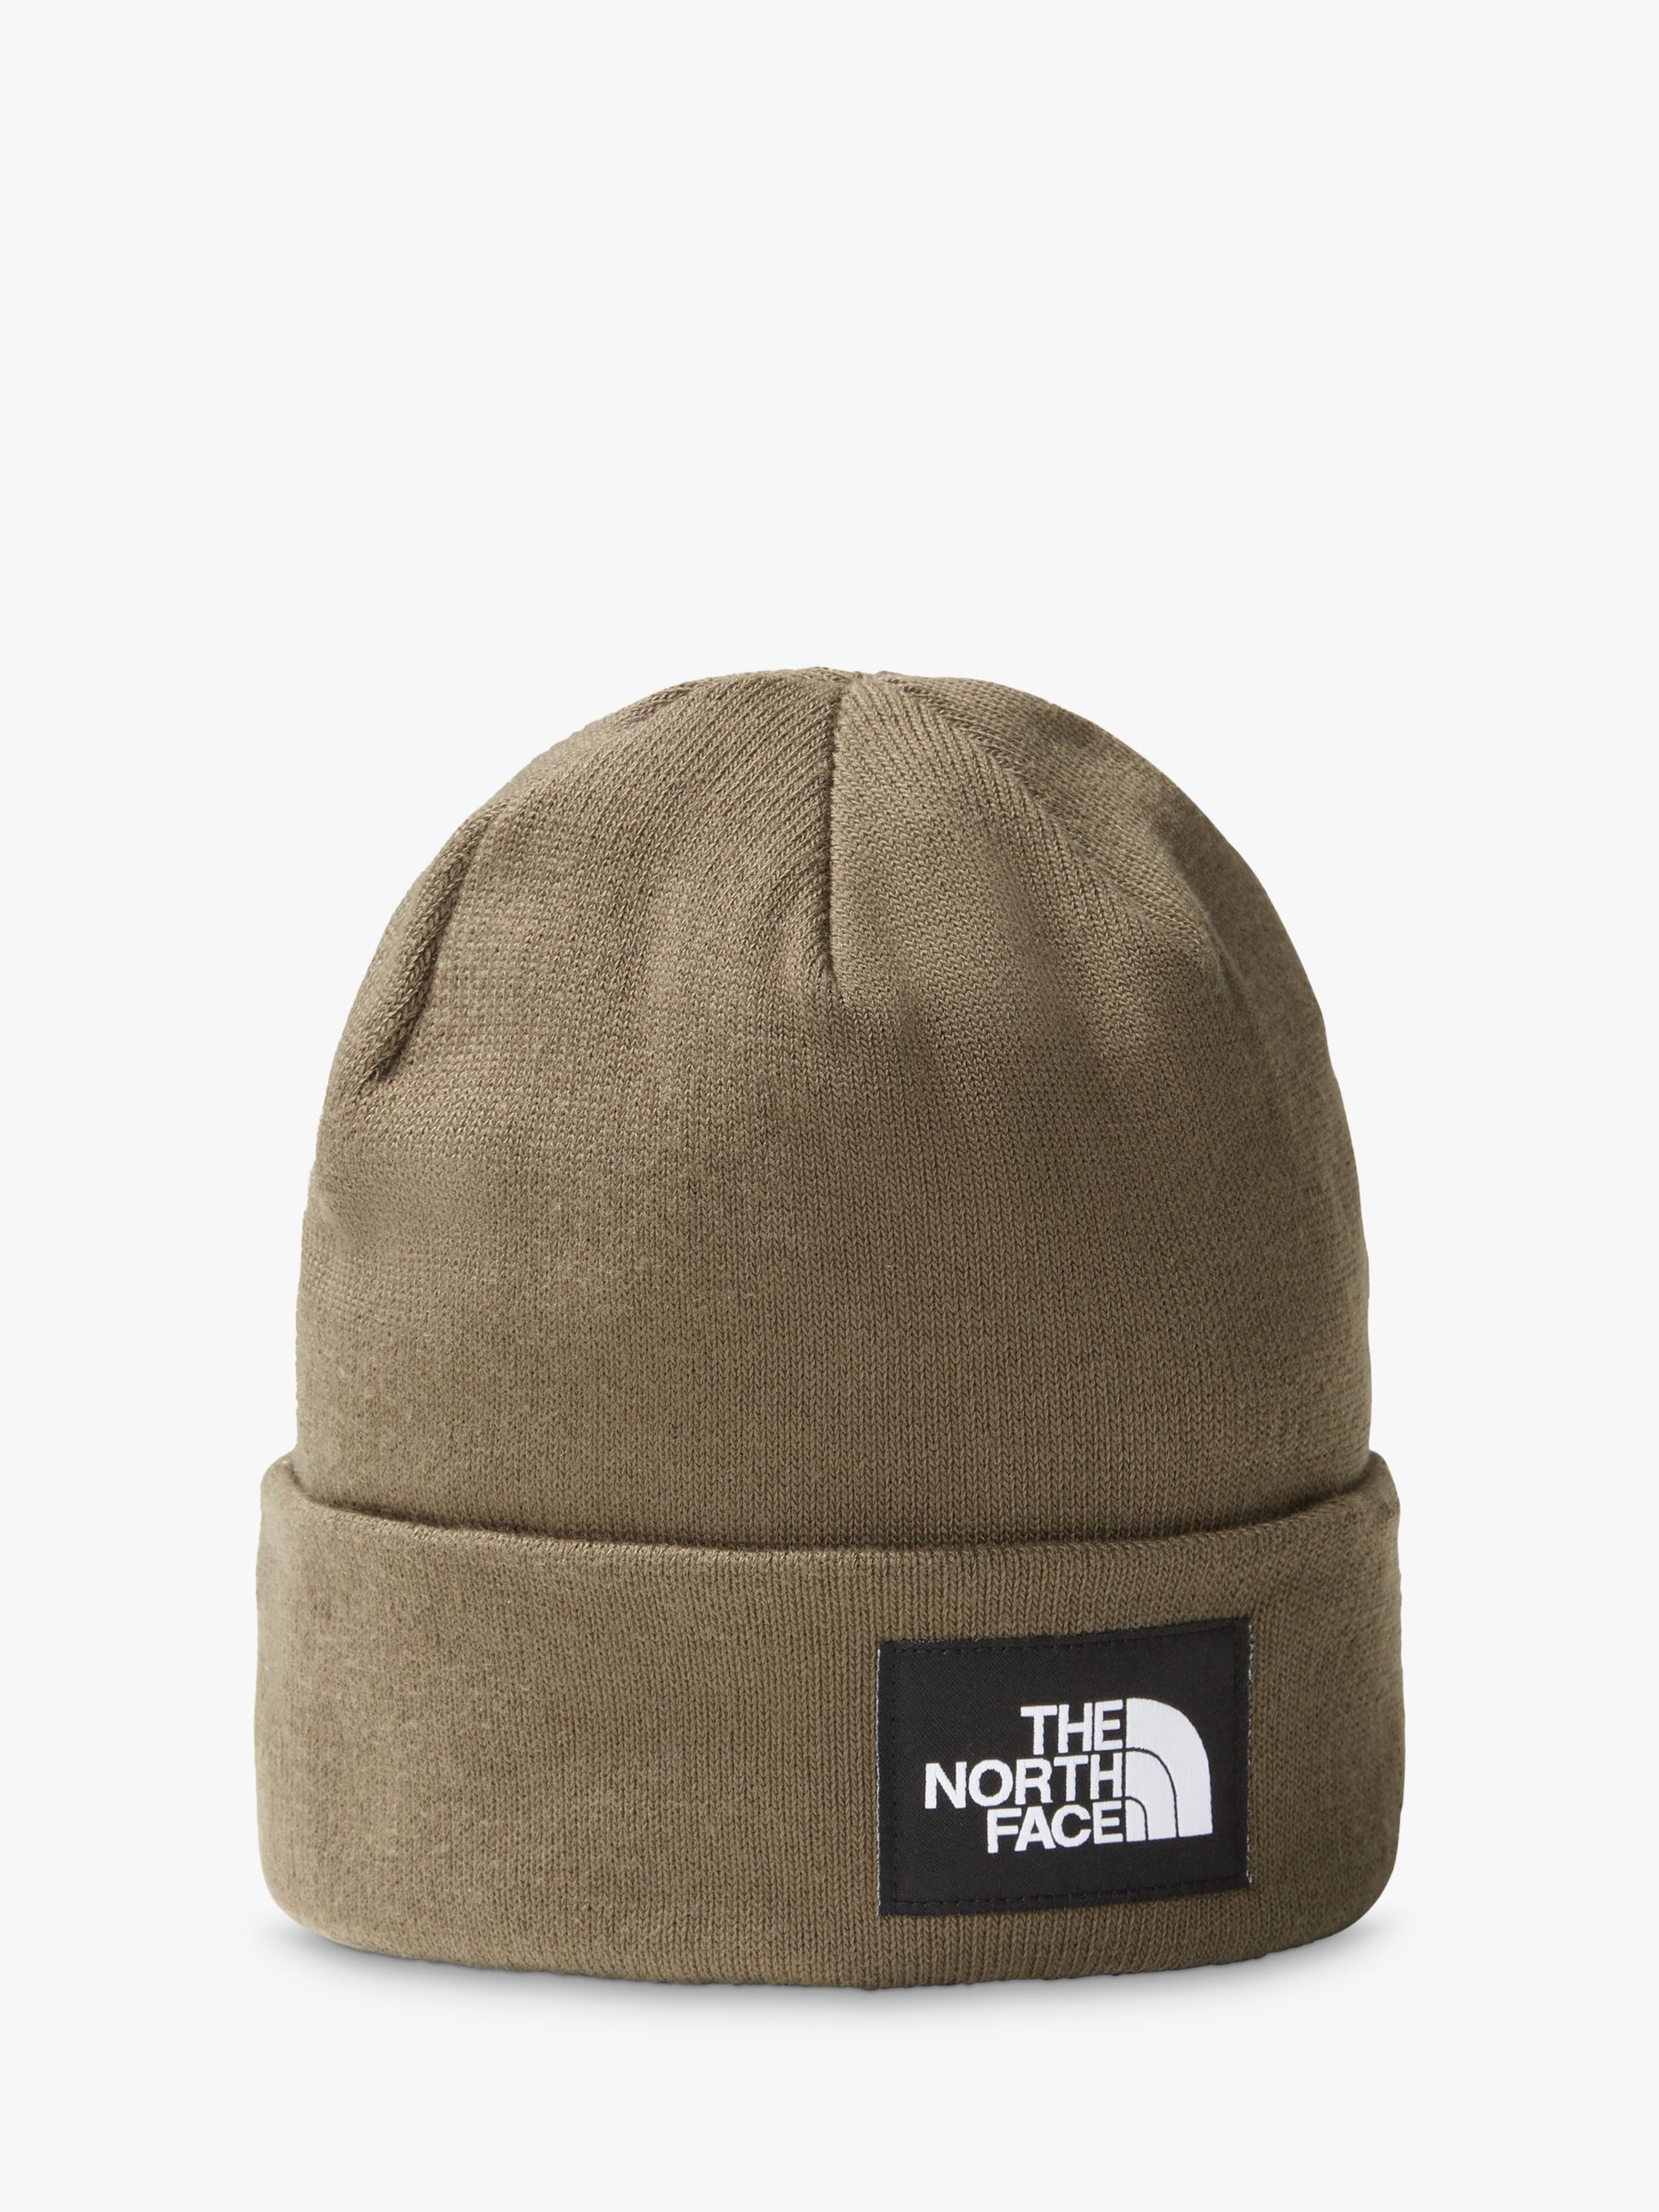 The North Face Dock Worker Recycled Beanie, New Taupe Green at John ...